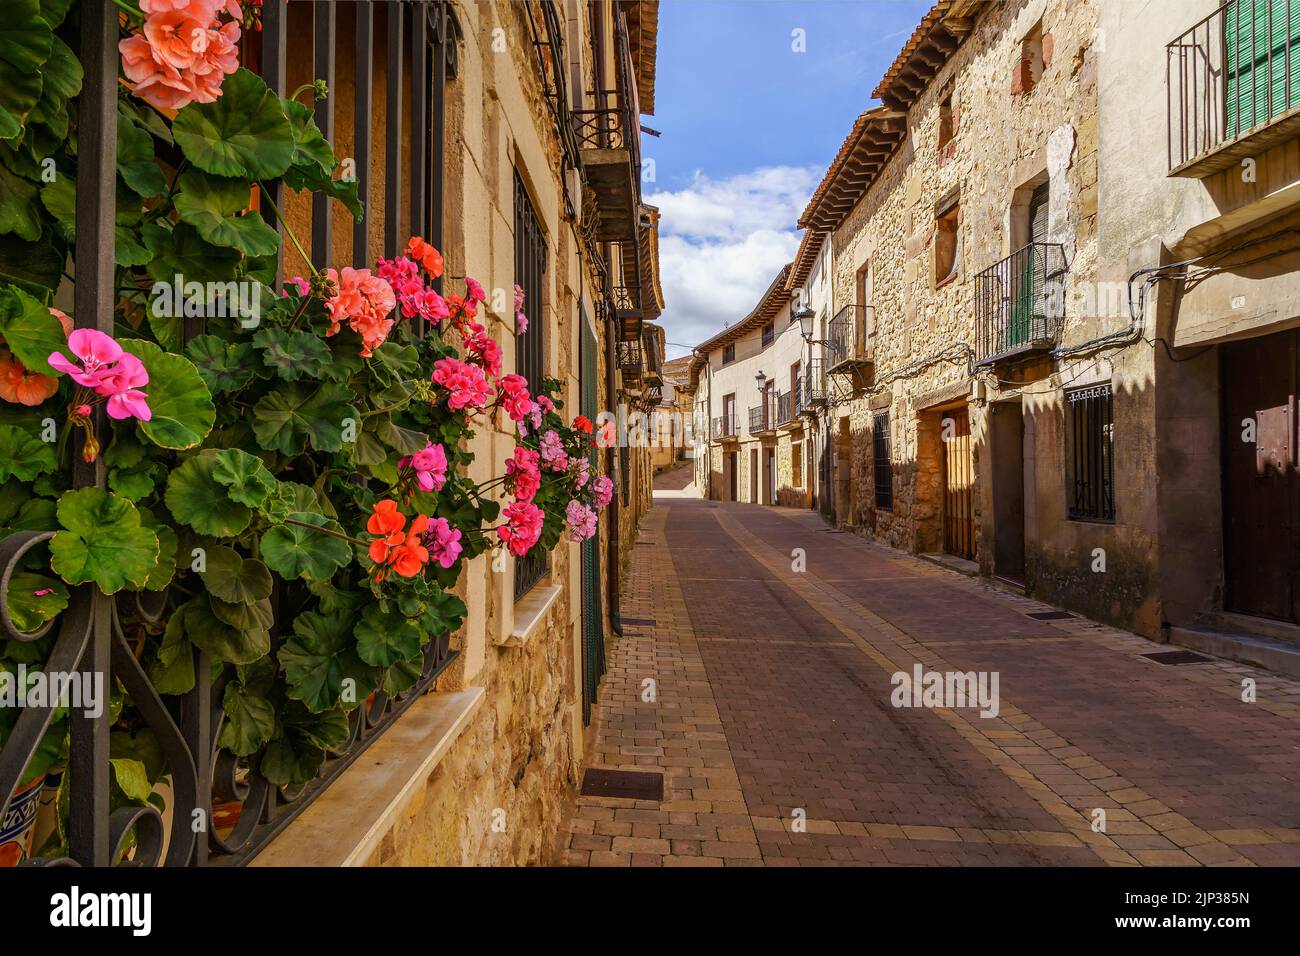 Medieval old town with stone houses, old doors and windows, cobbled streets and picturesque atmosphere. Atienza, Guadalajara, Spain. Europe. Stock Photo